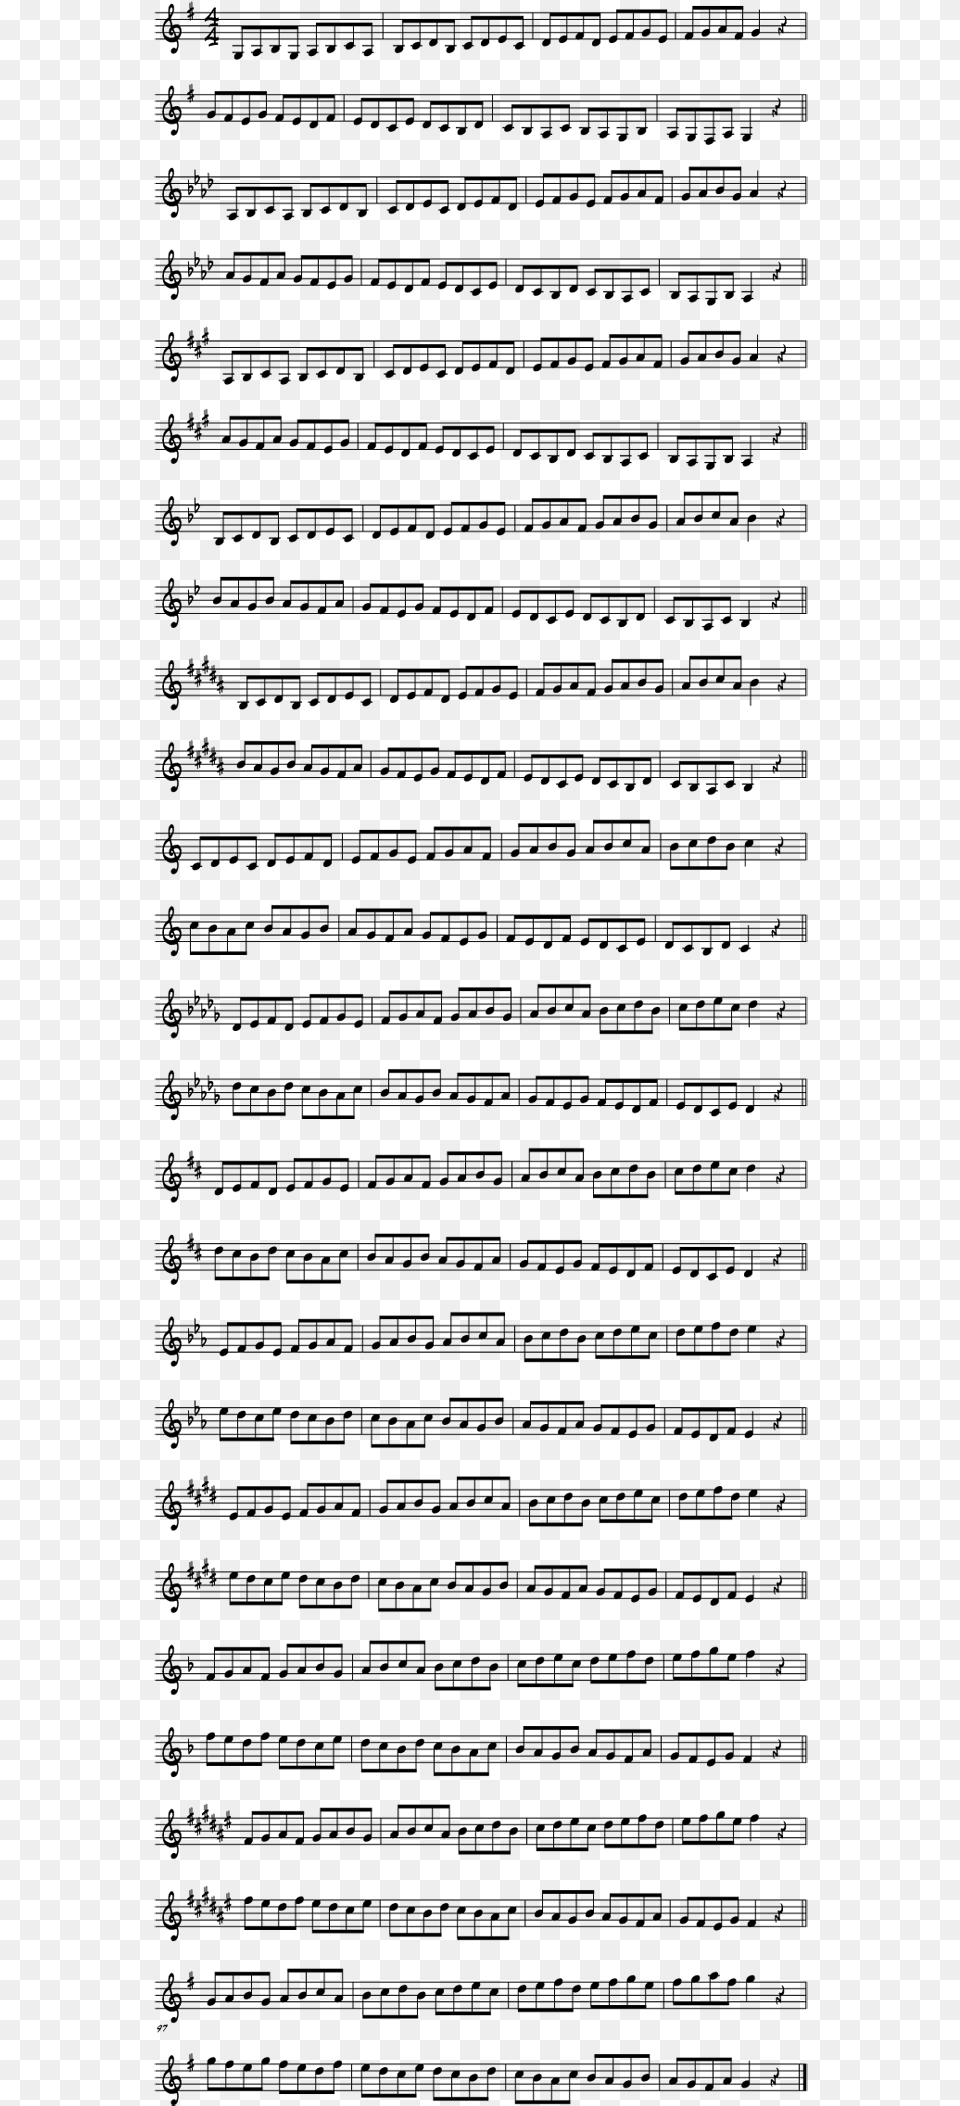 Ionian Exercise 1 Sheet Music, Gray Png Image